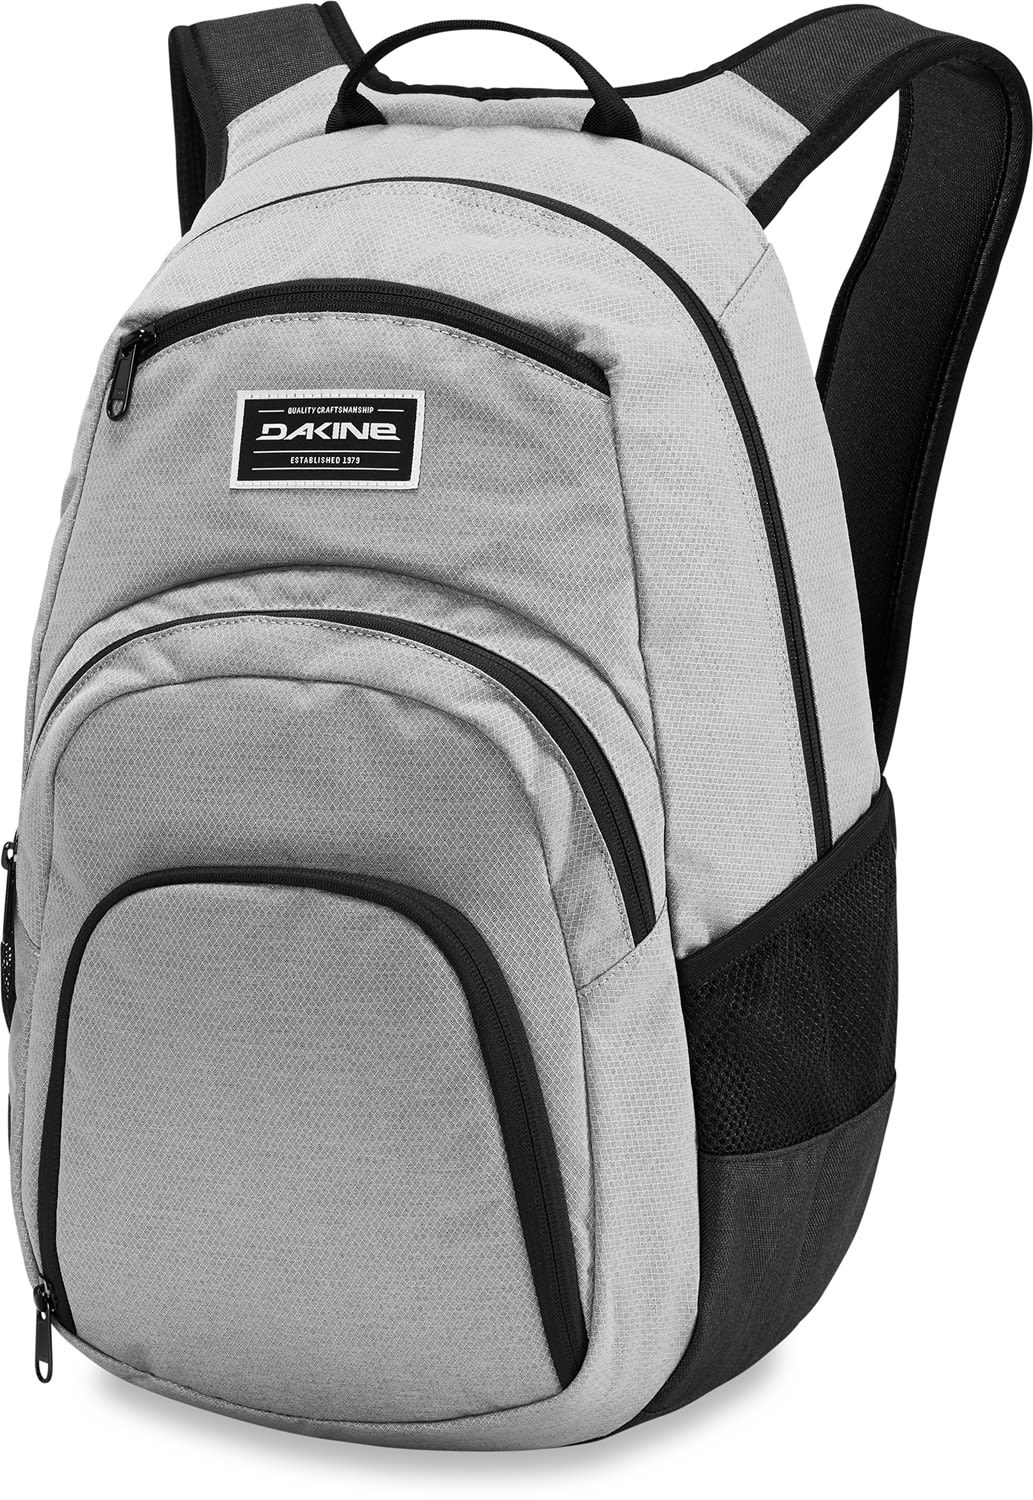 Dakine Campus 25L Backpack Rincon-Seaford-Laurelwood with Cooler Pocket NEW 